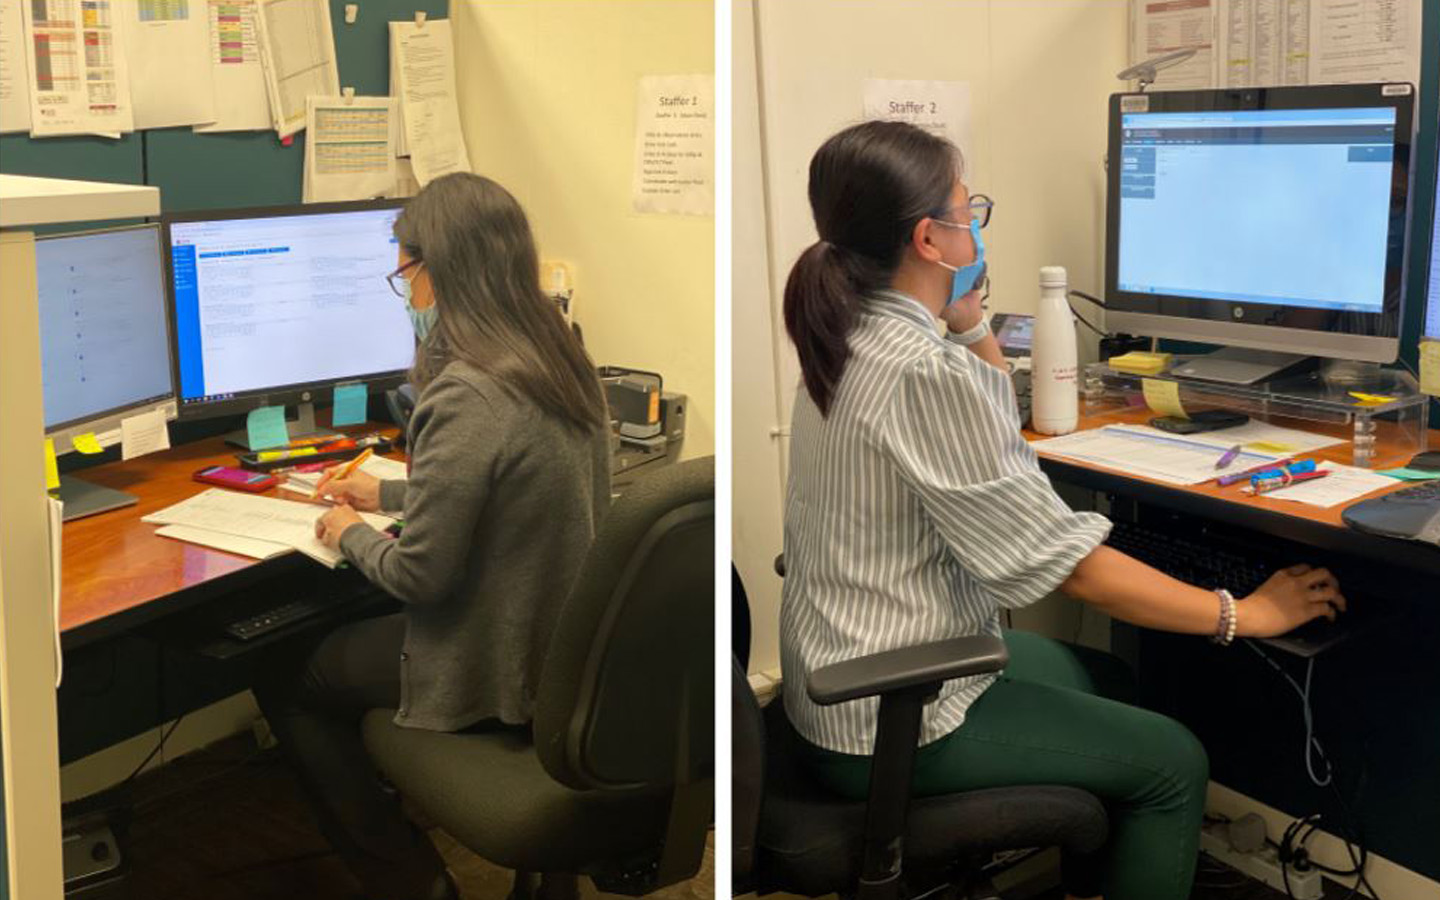 Staffing office managing the day to day operations and timecard support for the units